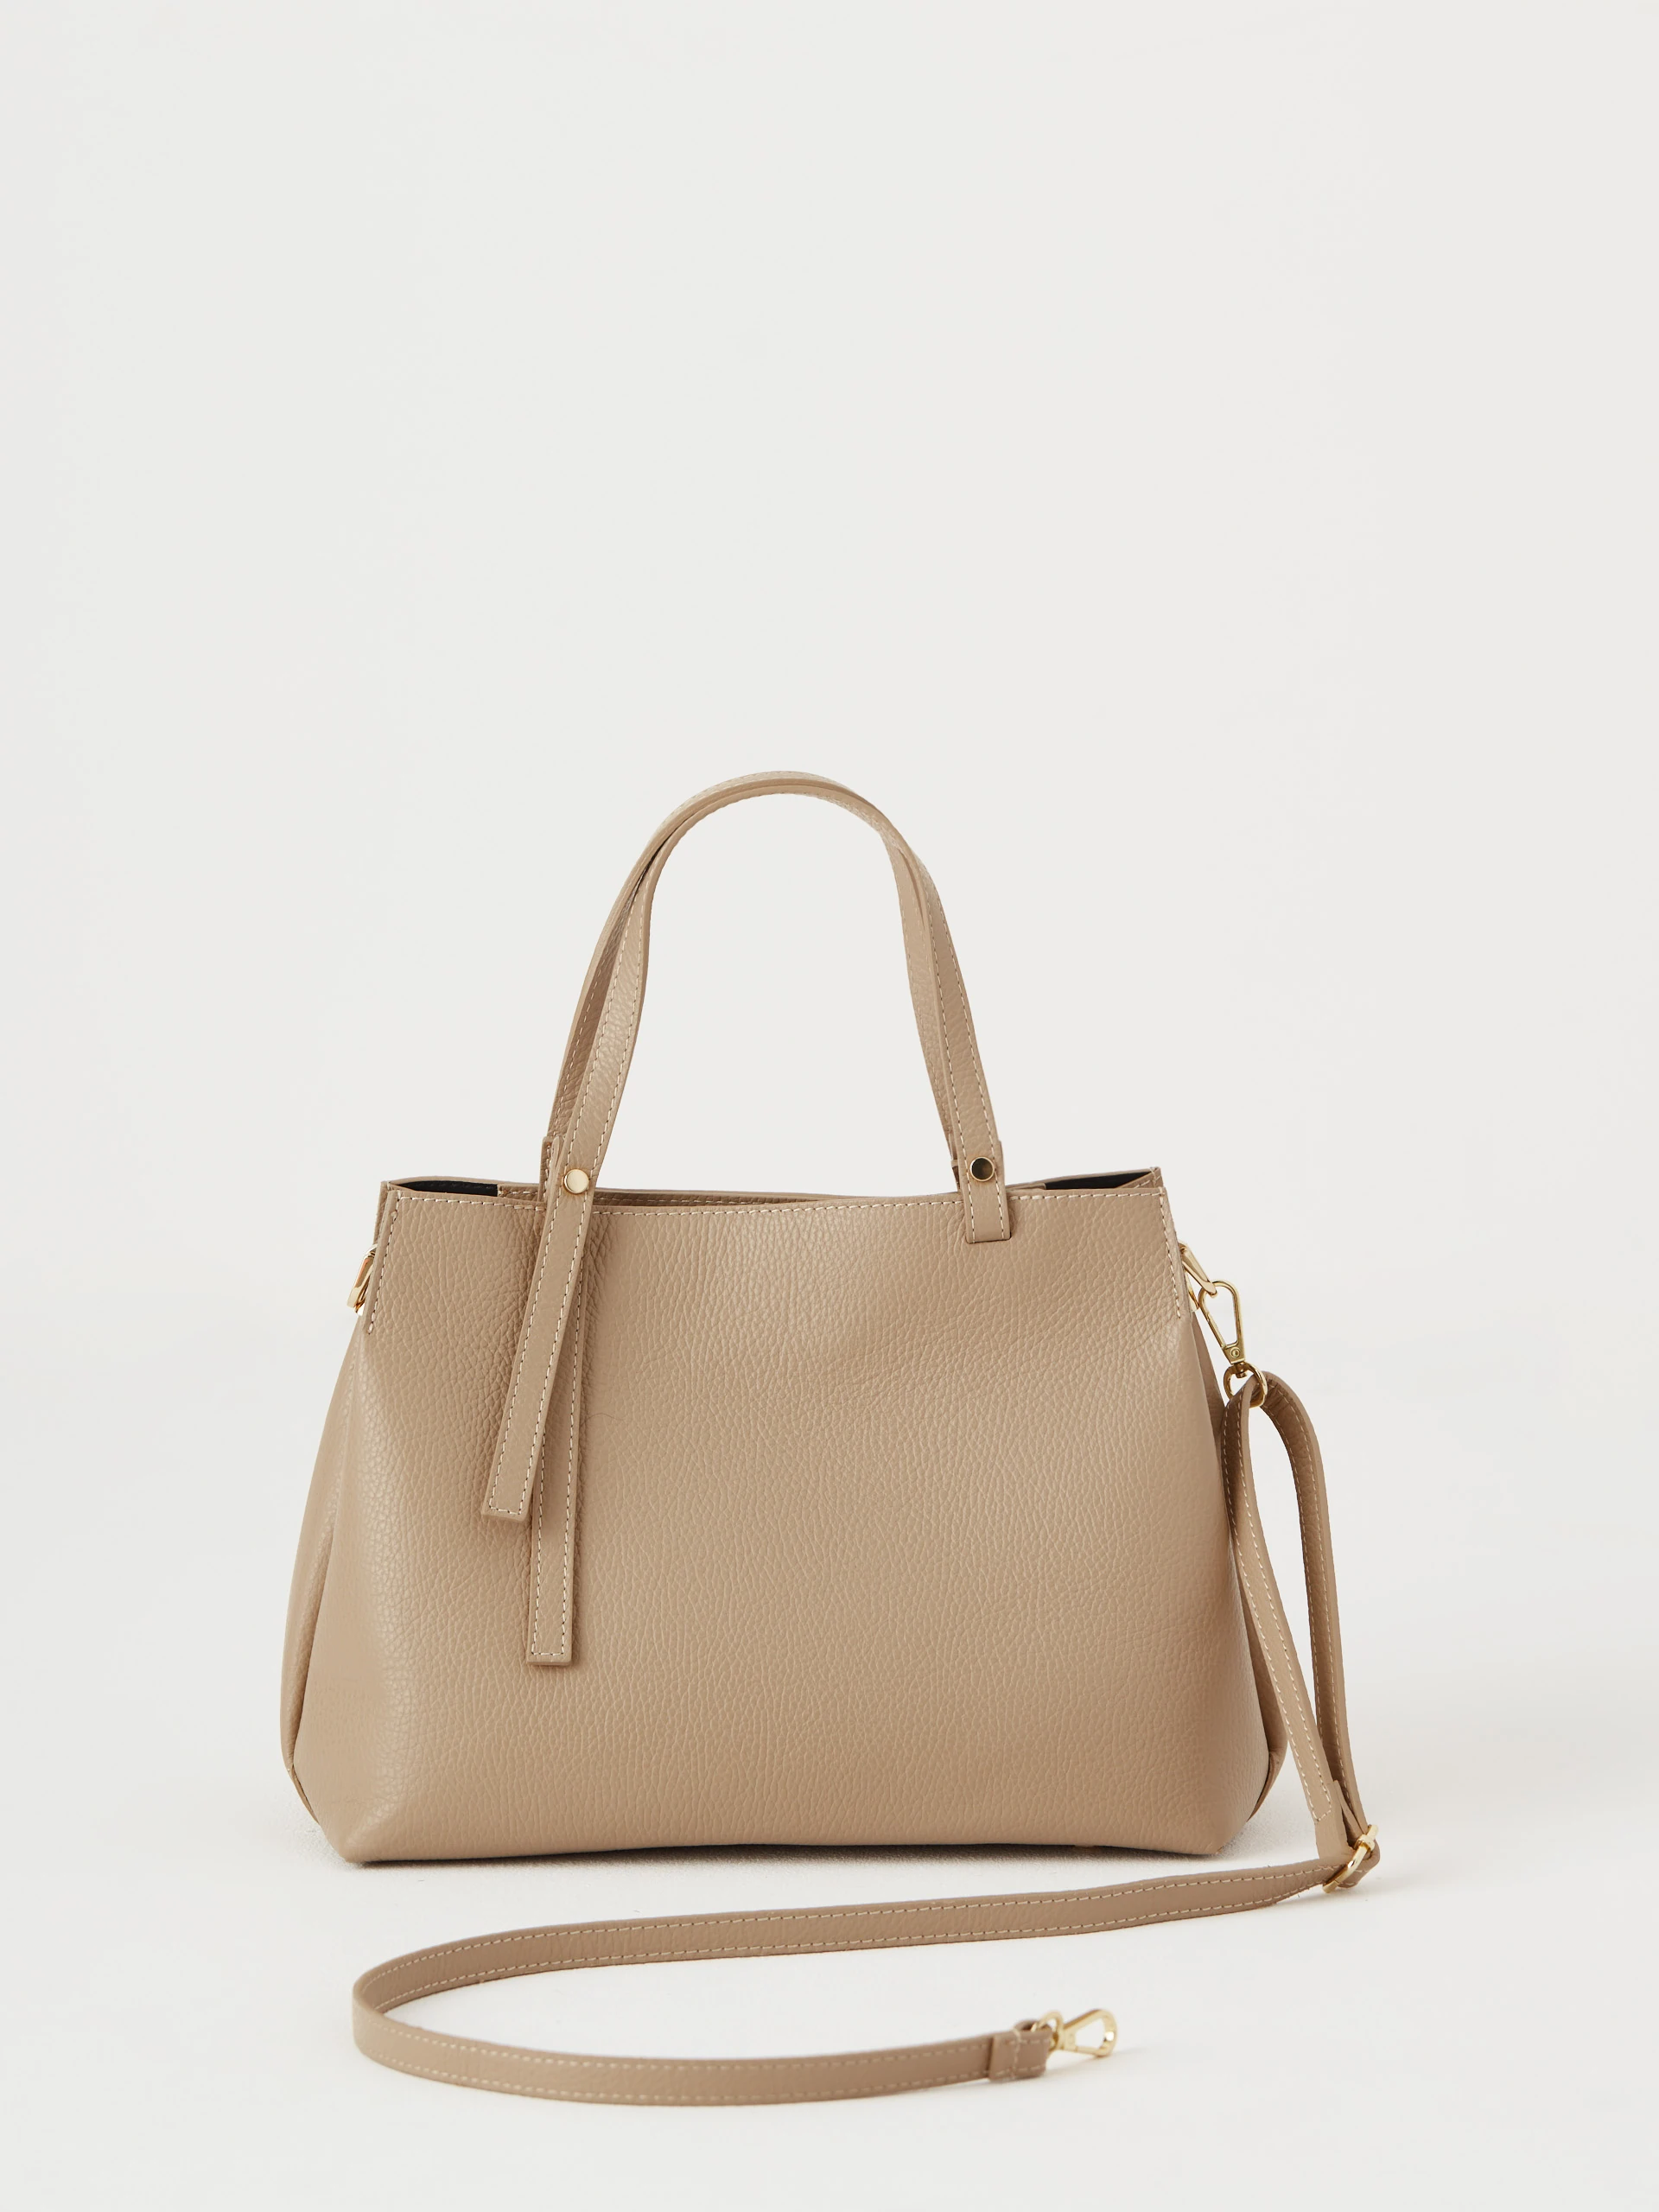 Leather shopper bag in taupe